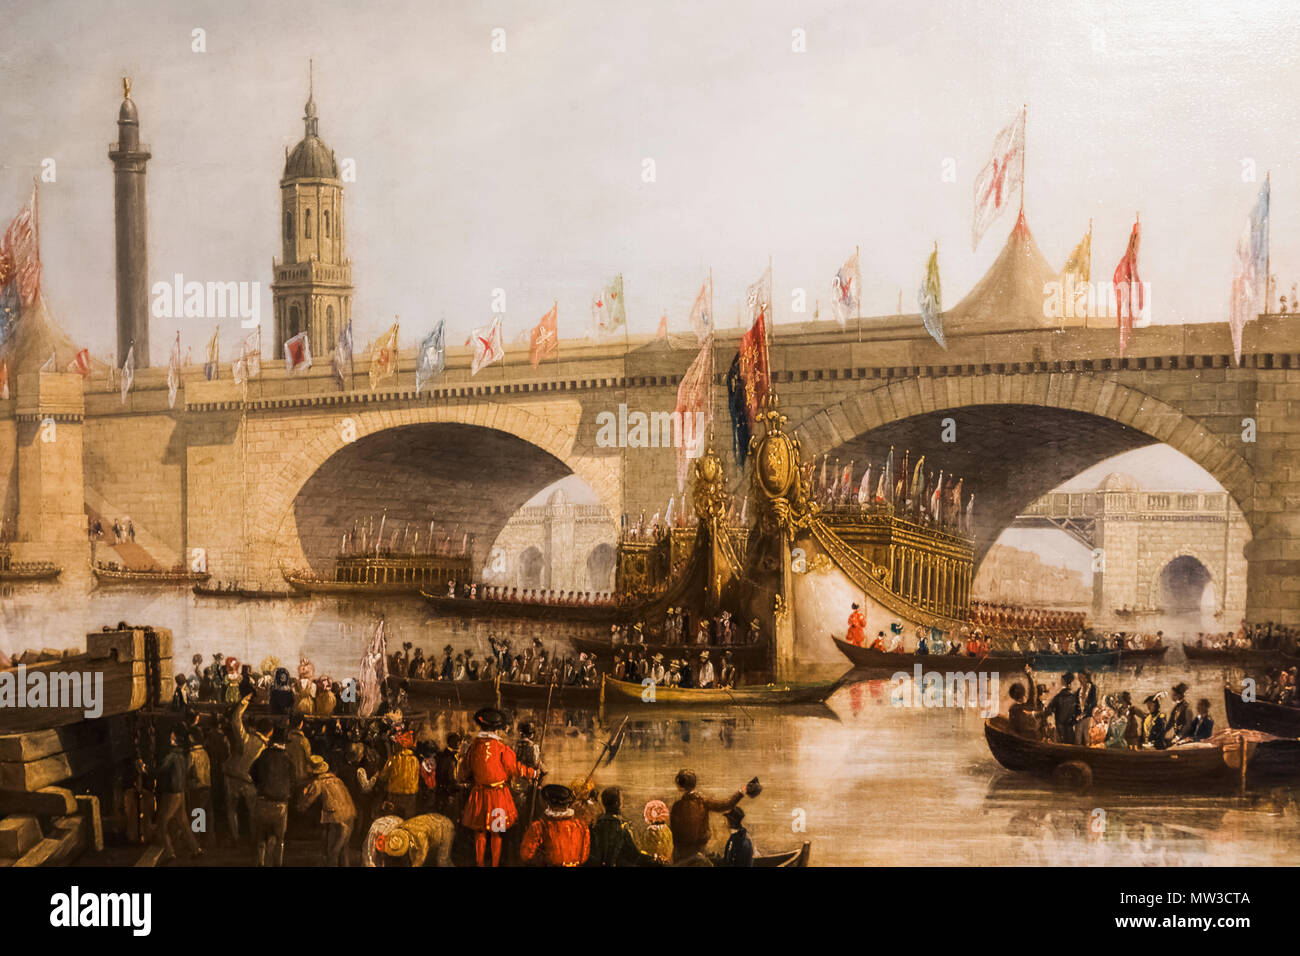 England, London, City of London, Guildhall, Guildhall Art Museum, Painting of The Opening of London Bridge by William IV on 1st August 1831 by Clarkso Stock Photo